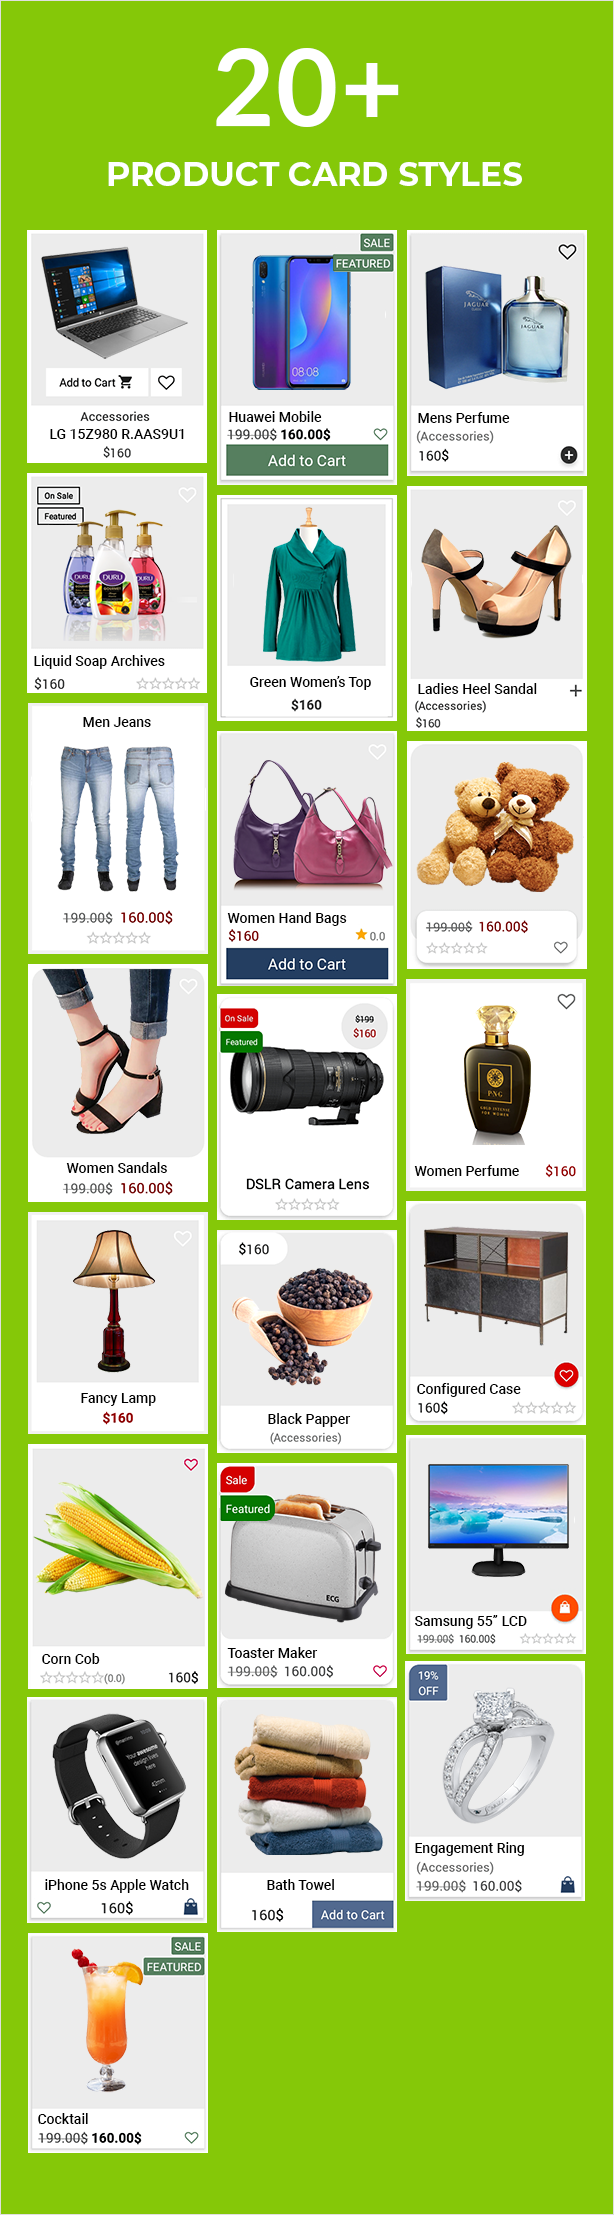 Android Ecommerce - Universal Android Ecommerce / Store Full Mobile App with Laravel CMS - 10